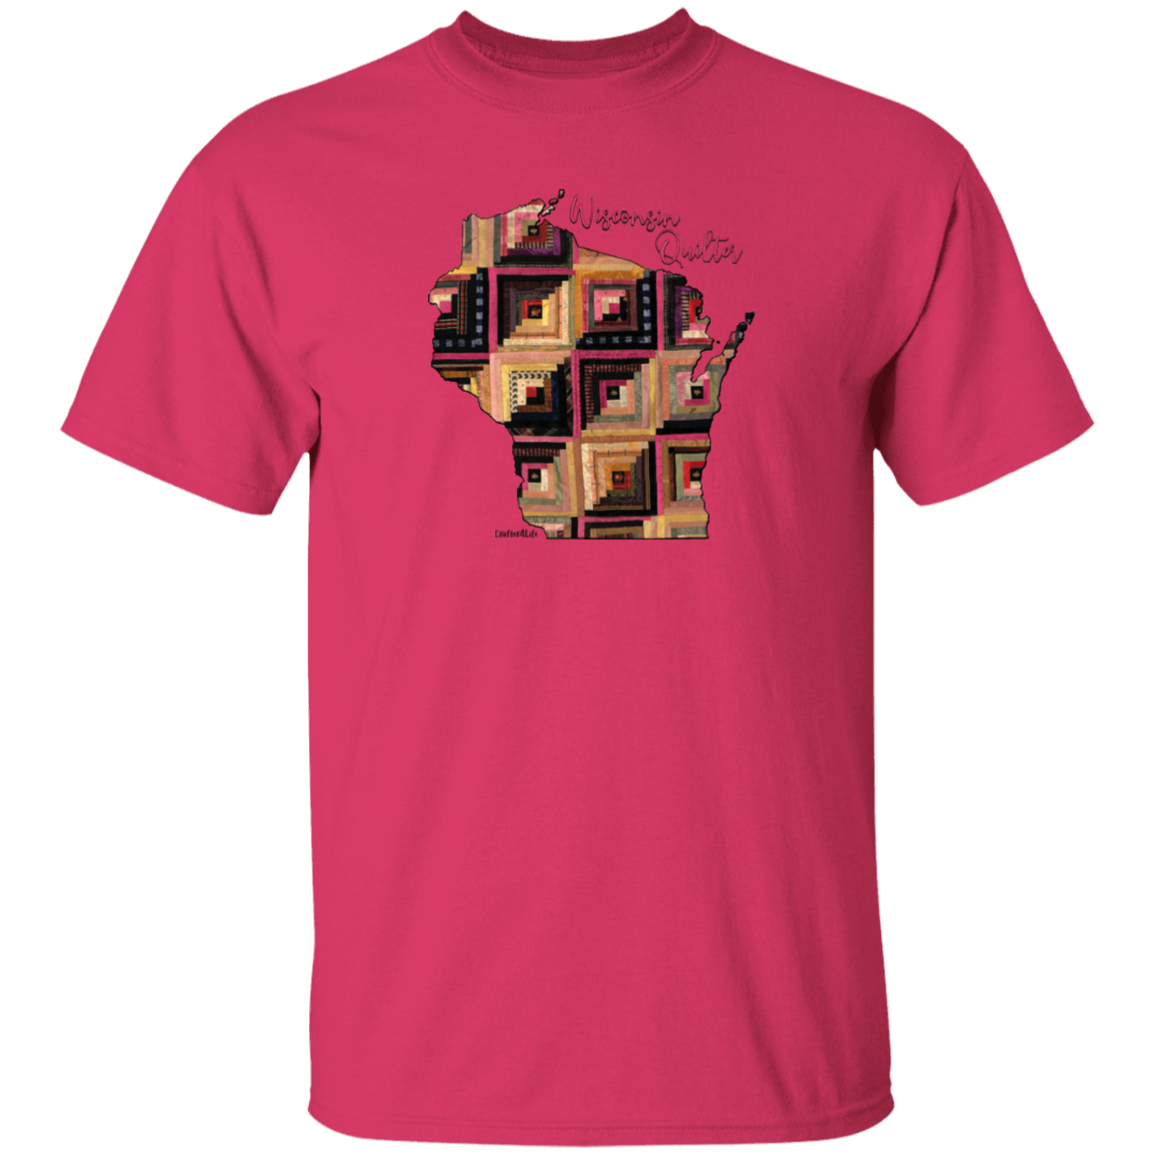 Wisconsin Quilter T-Shirt, Gift for Quilting Friends and Family